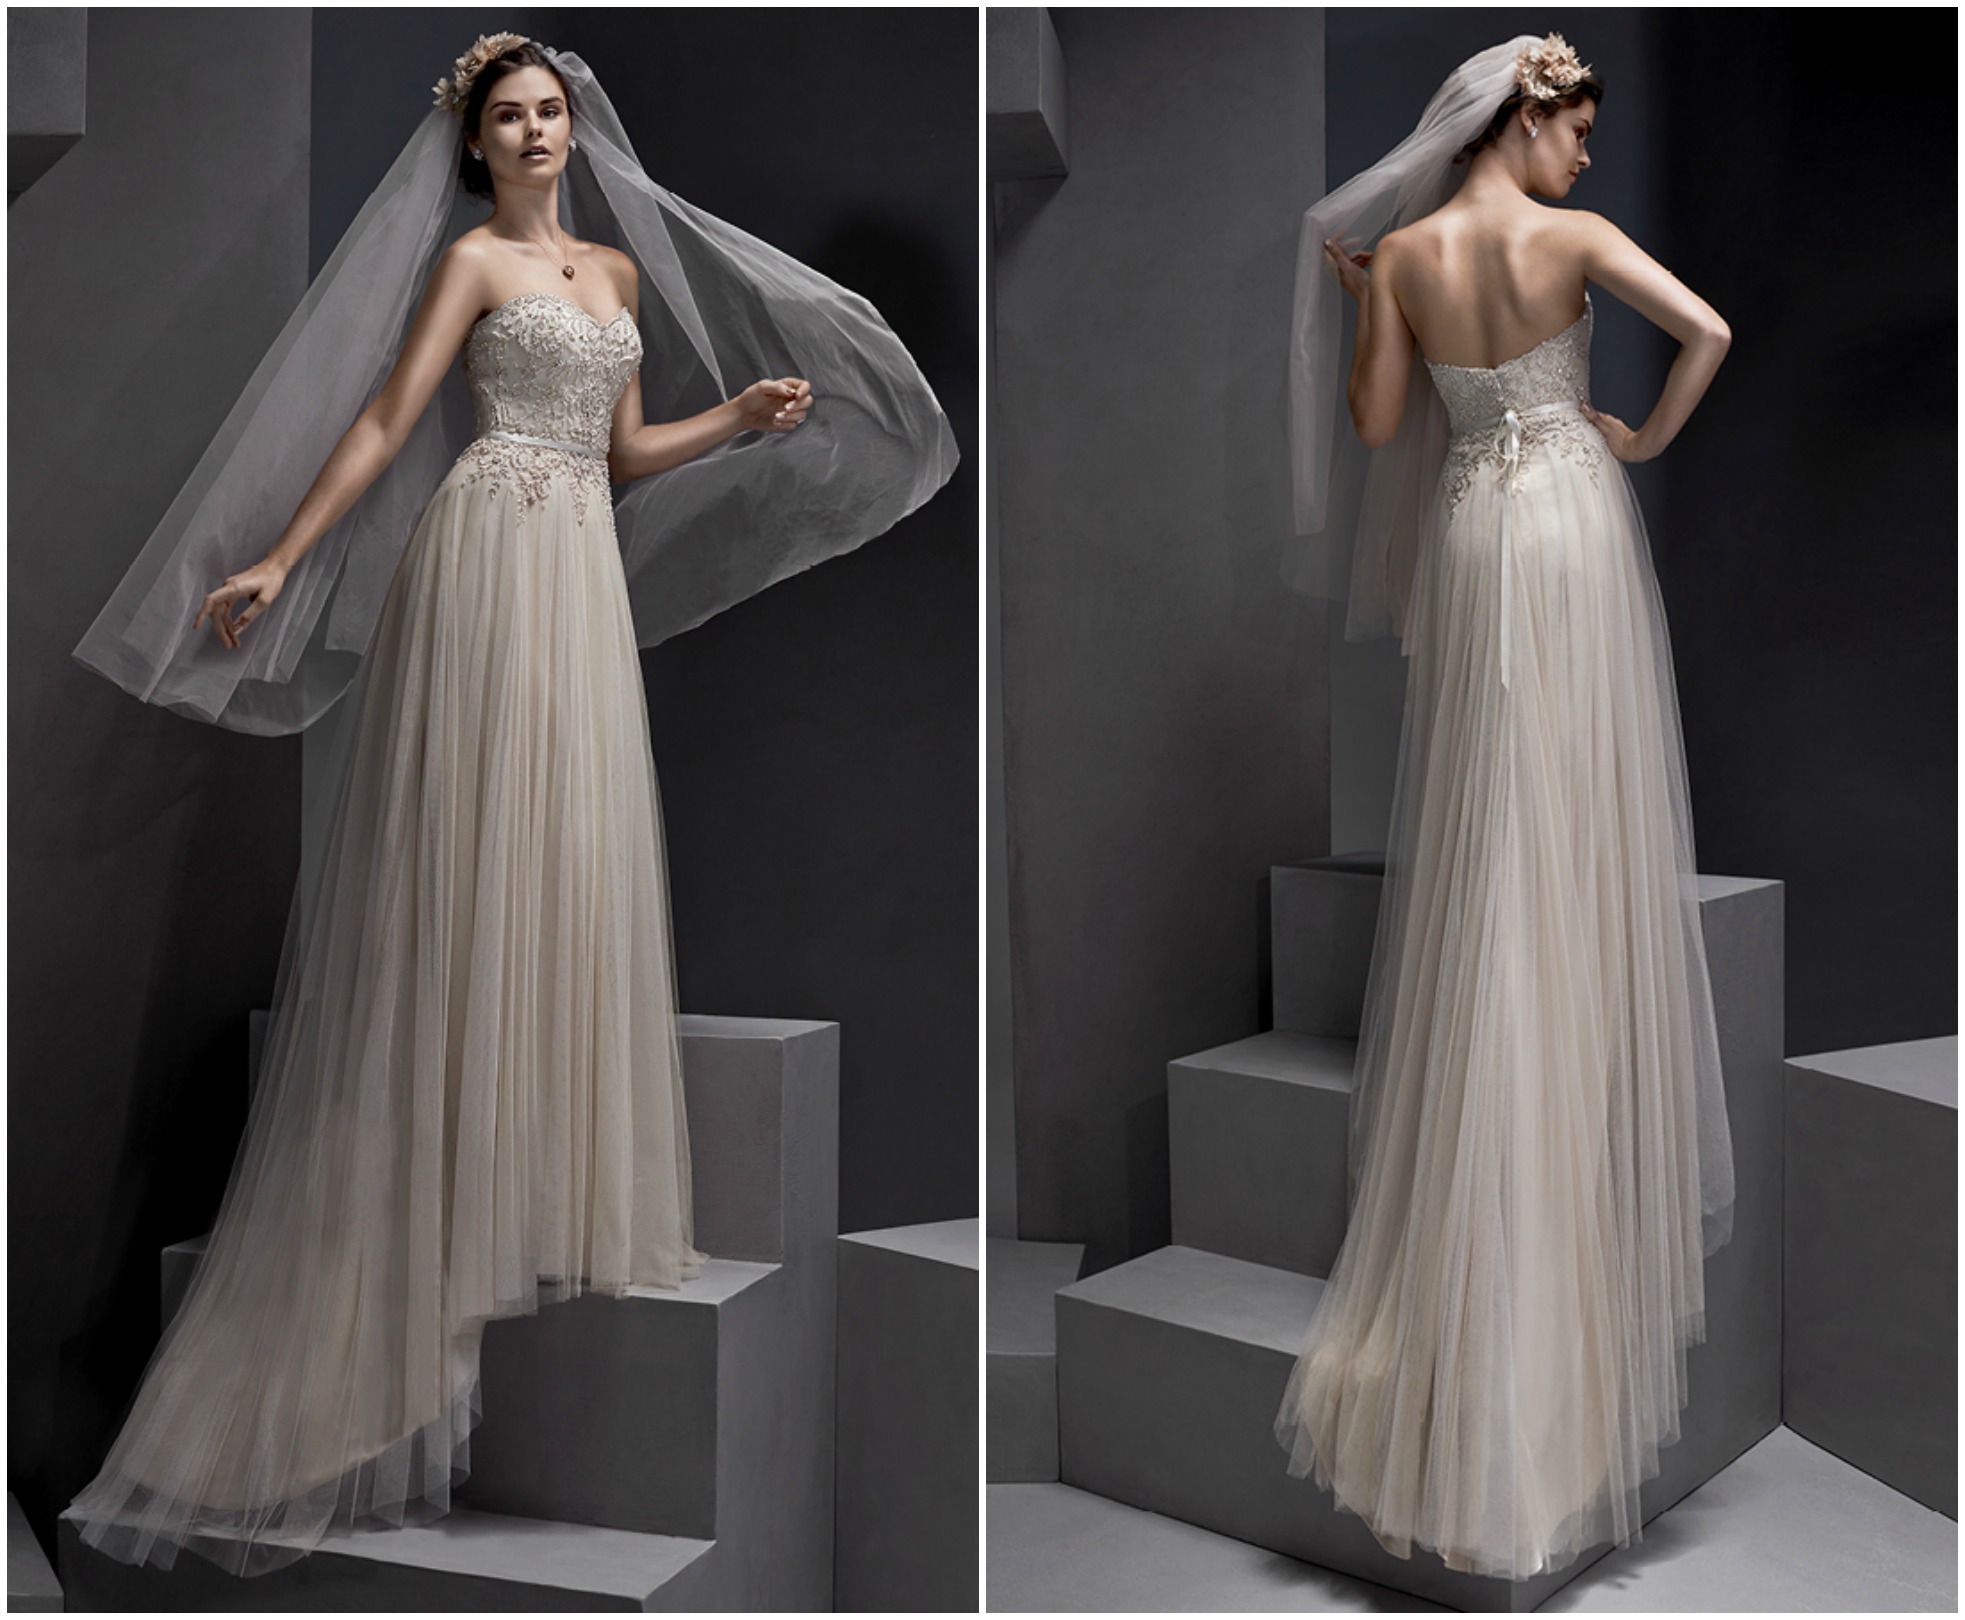 <a href="http://www.sotteroandmidgley.com/dress.aspx?style=5SD059&amp;page=0&amp;pageSize=36&amp;keywordText=&amp;keywordType=All" target="_blank">Sottero and Midgley 2016</a>